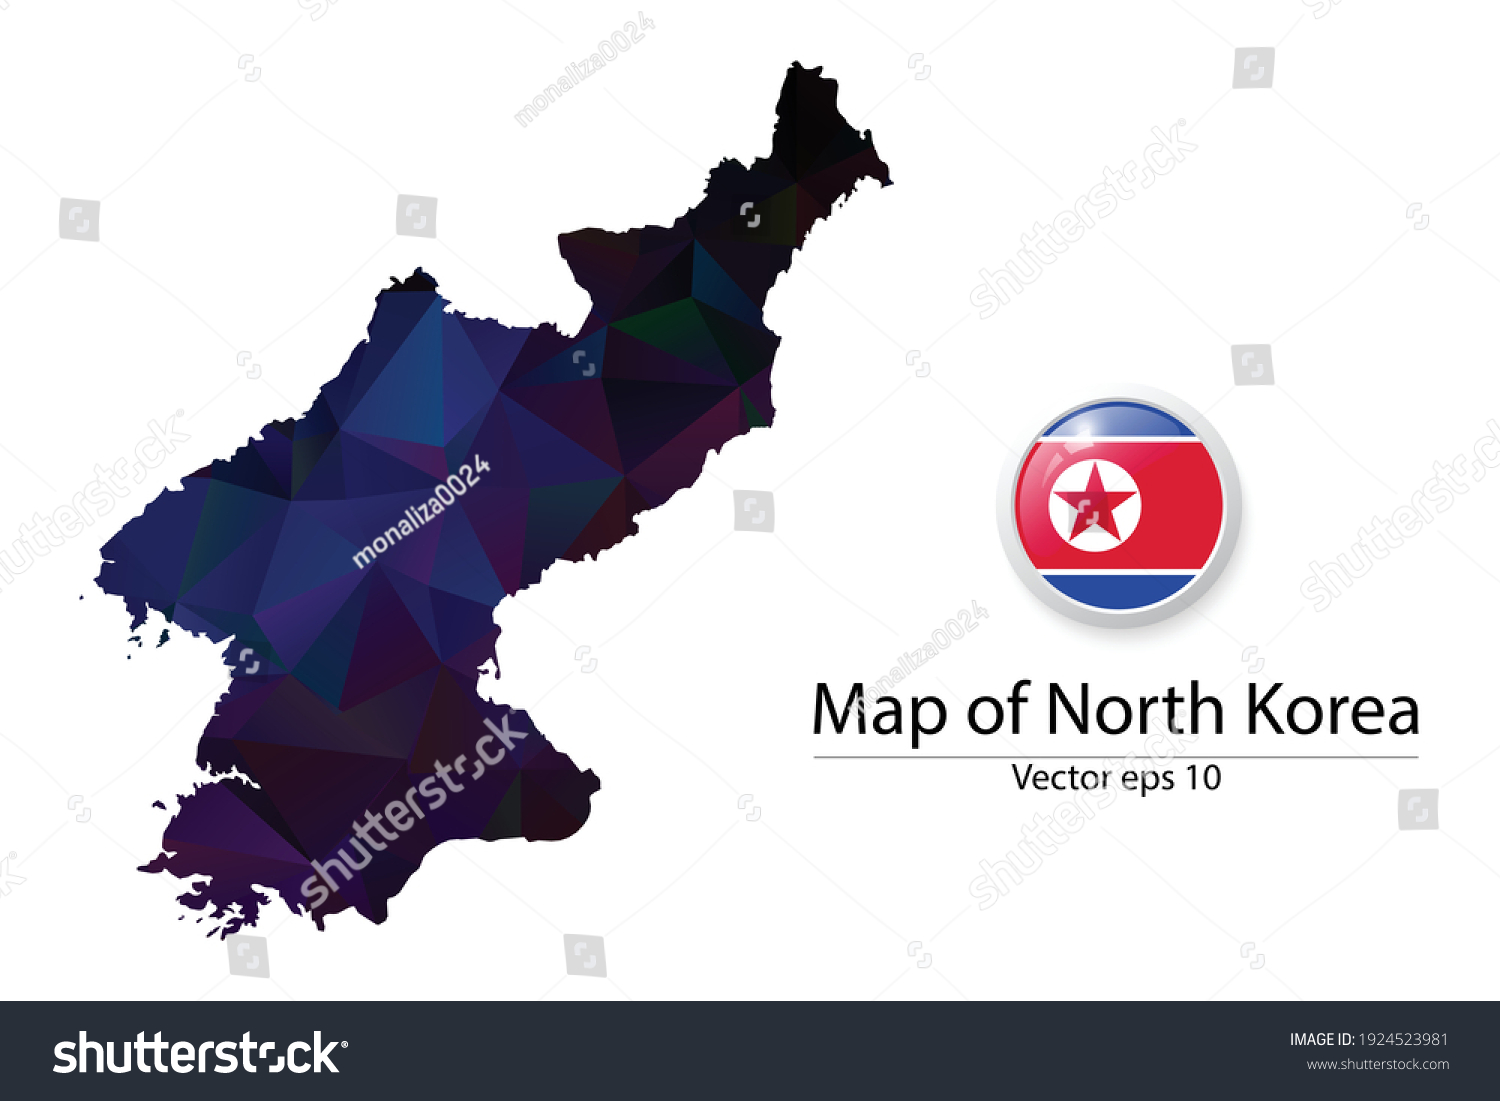 Abstract Polygon Map and Button Flag - Vector - Royalty Free Stock ...